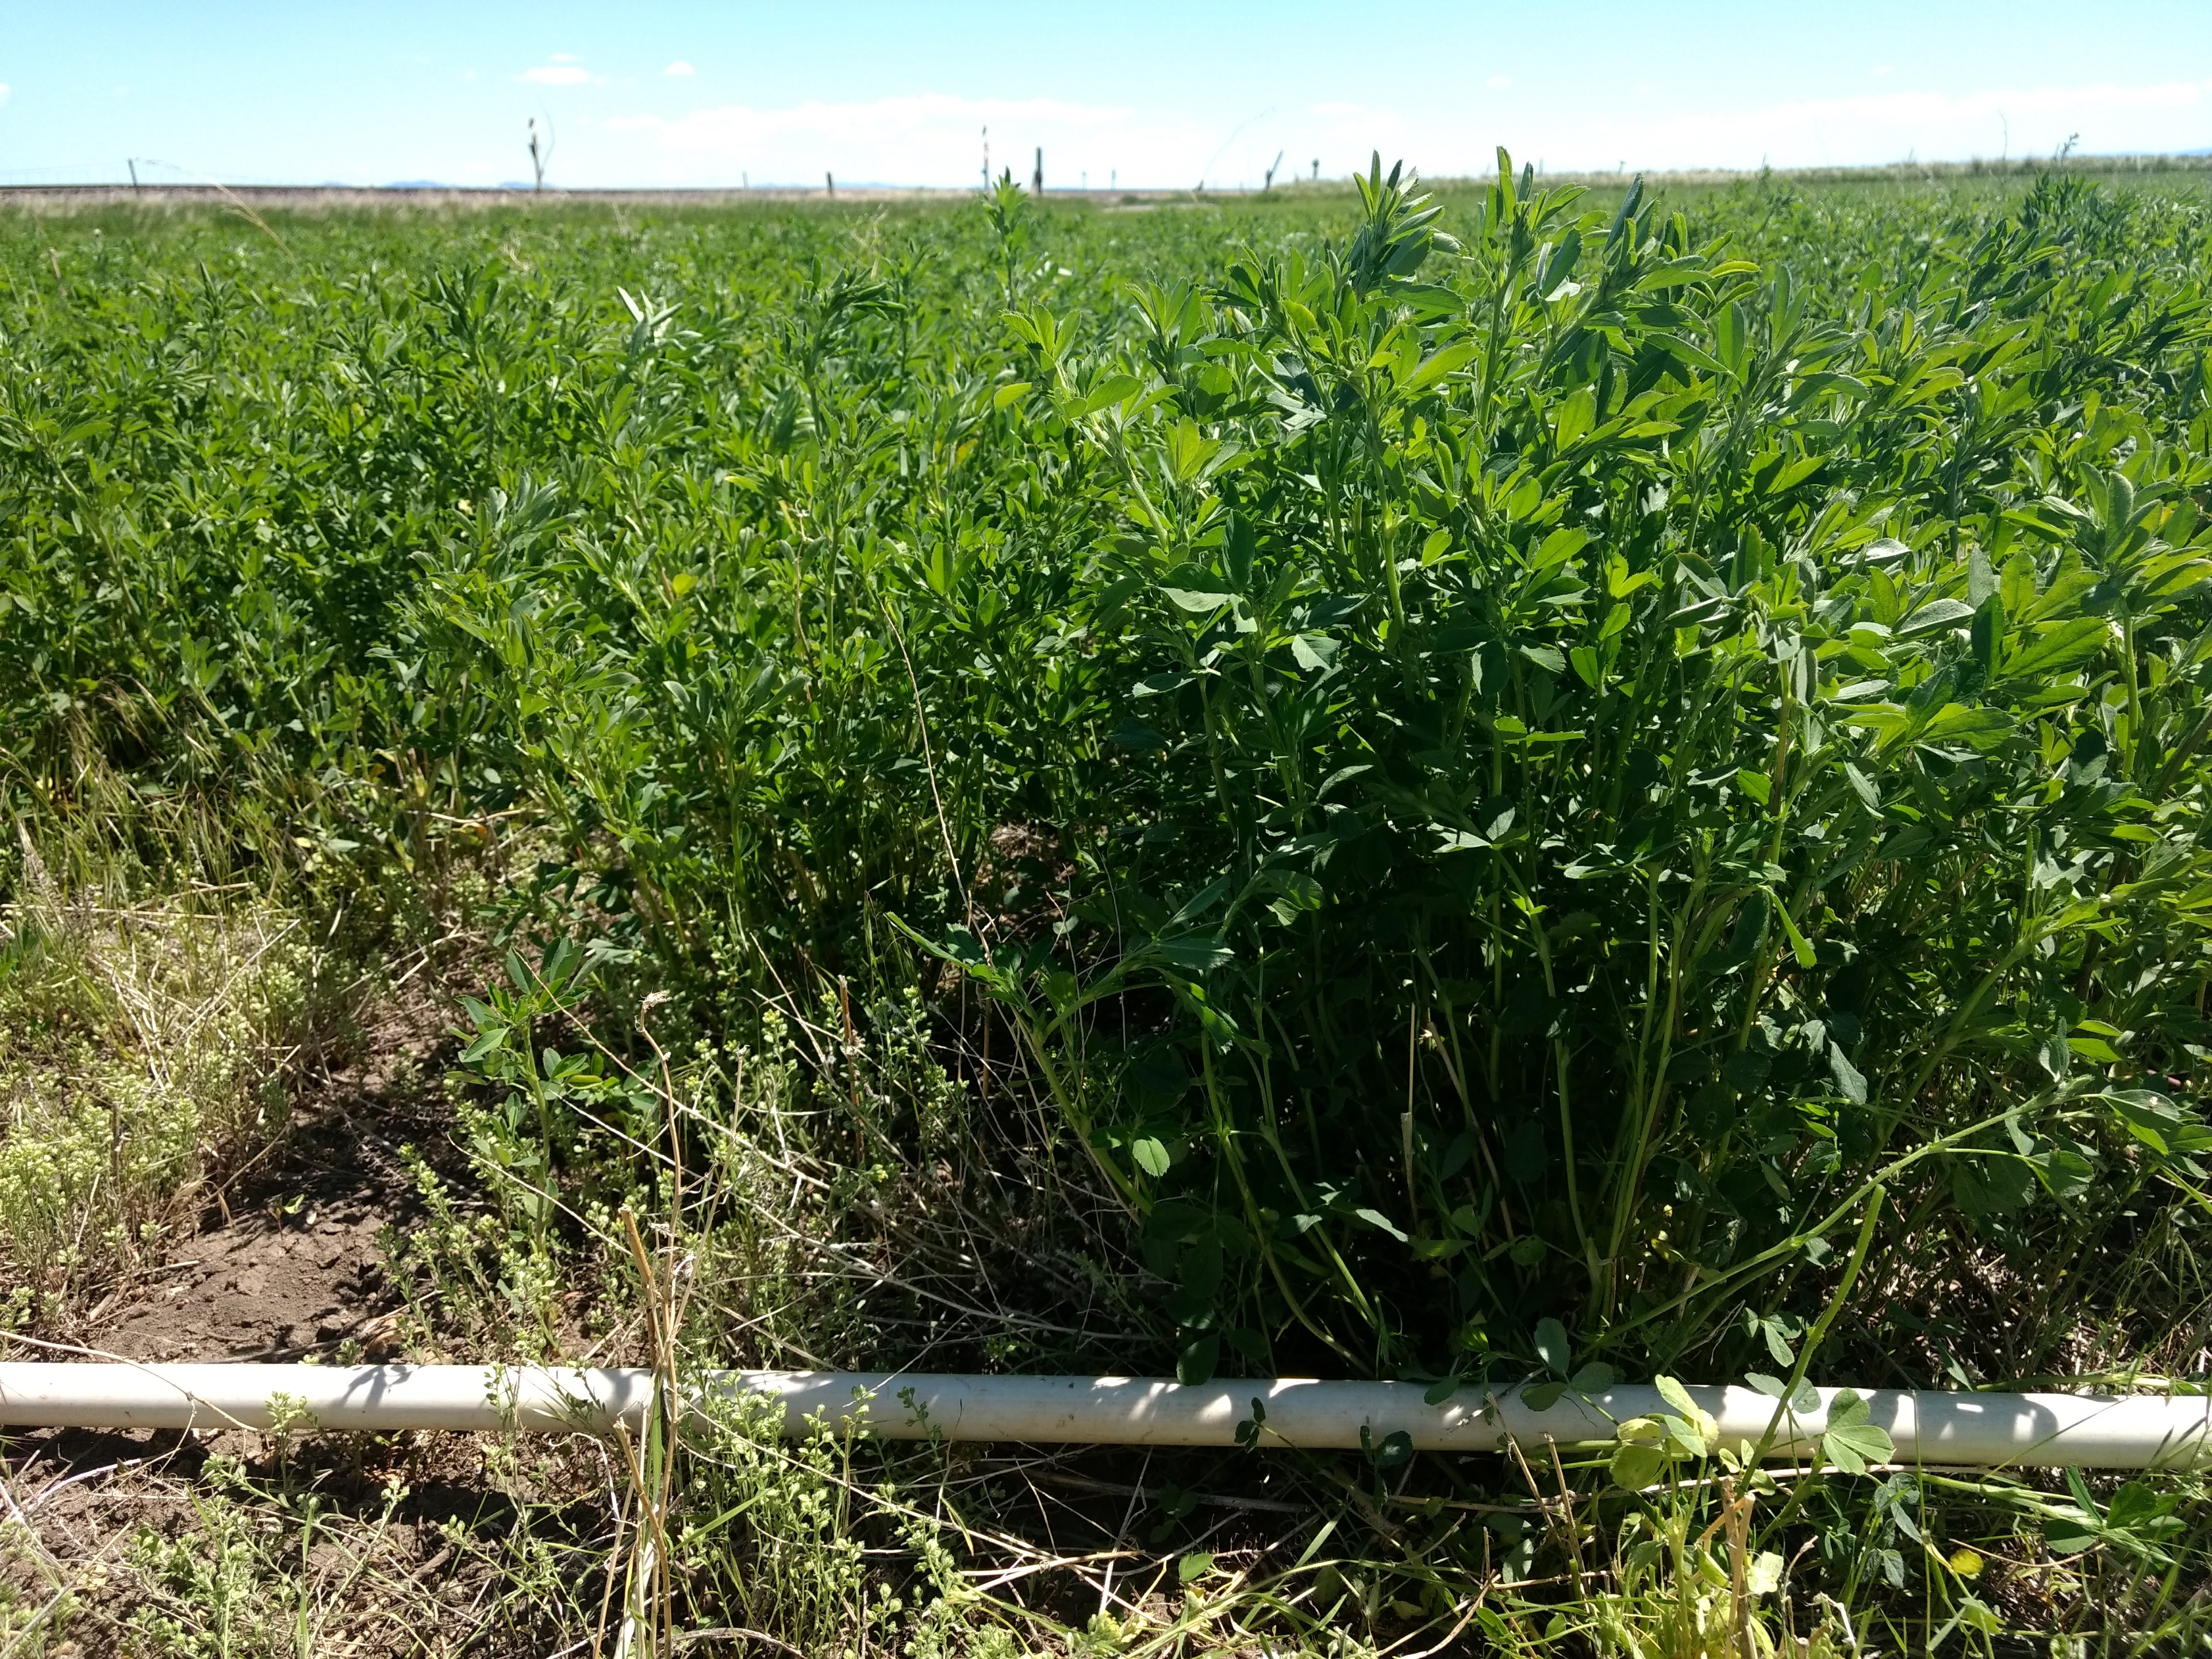 Healthy stand of alfalfa at CARC (Moccasin, MT)